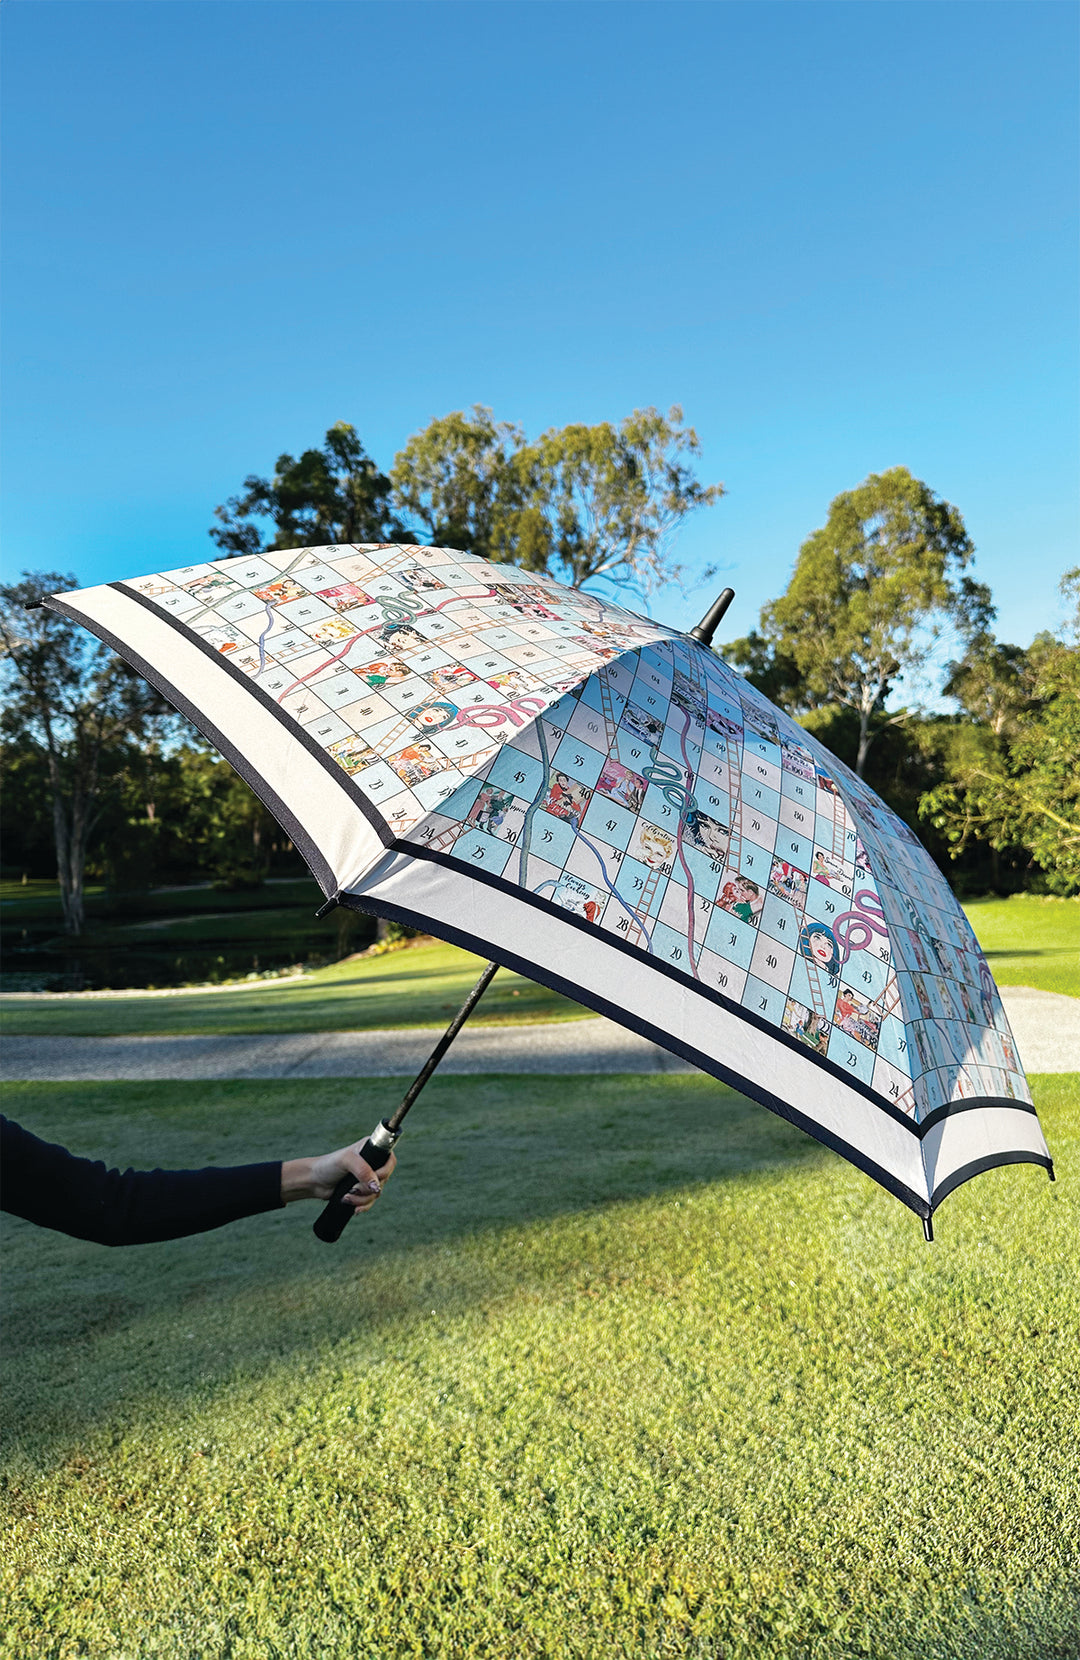 Snakes And Ladders Umbrella (Extra Large)